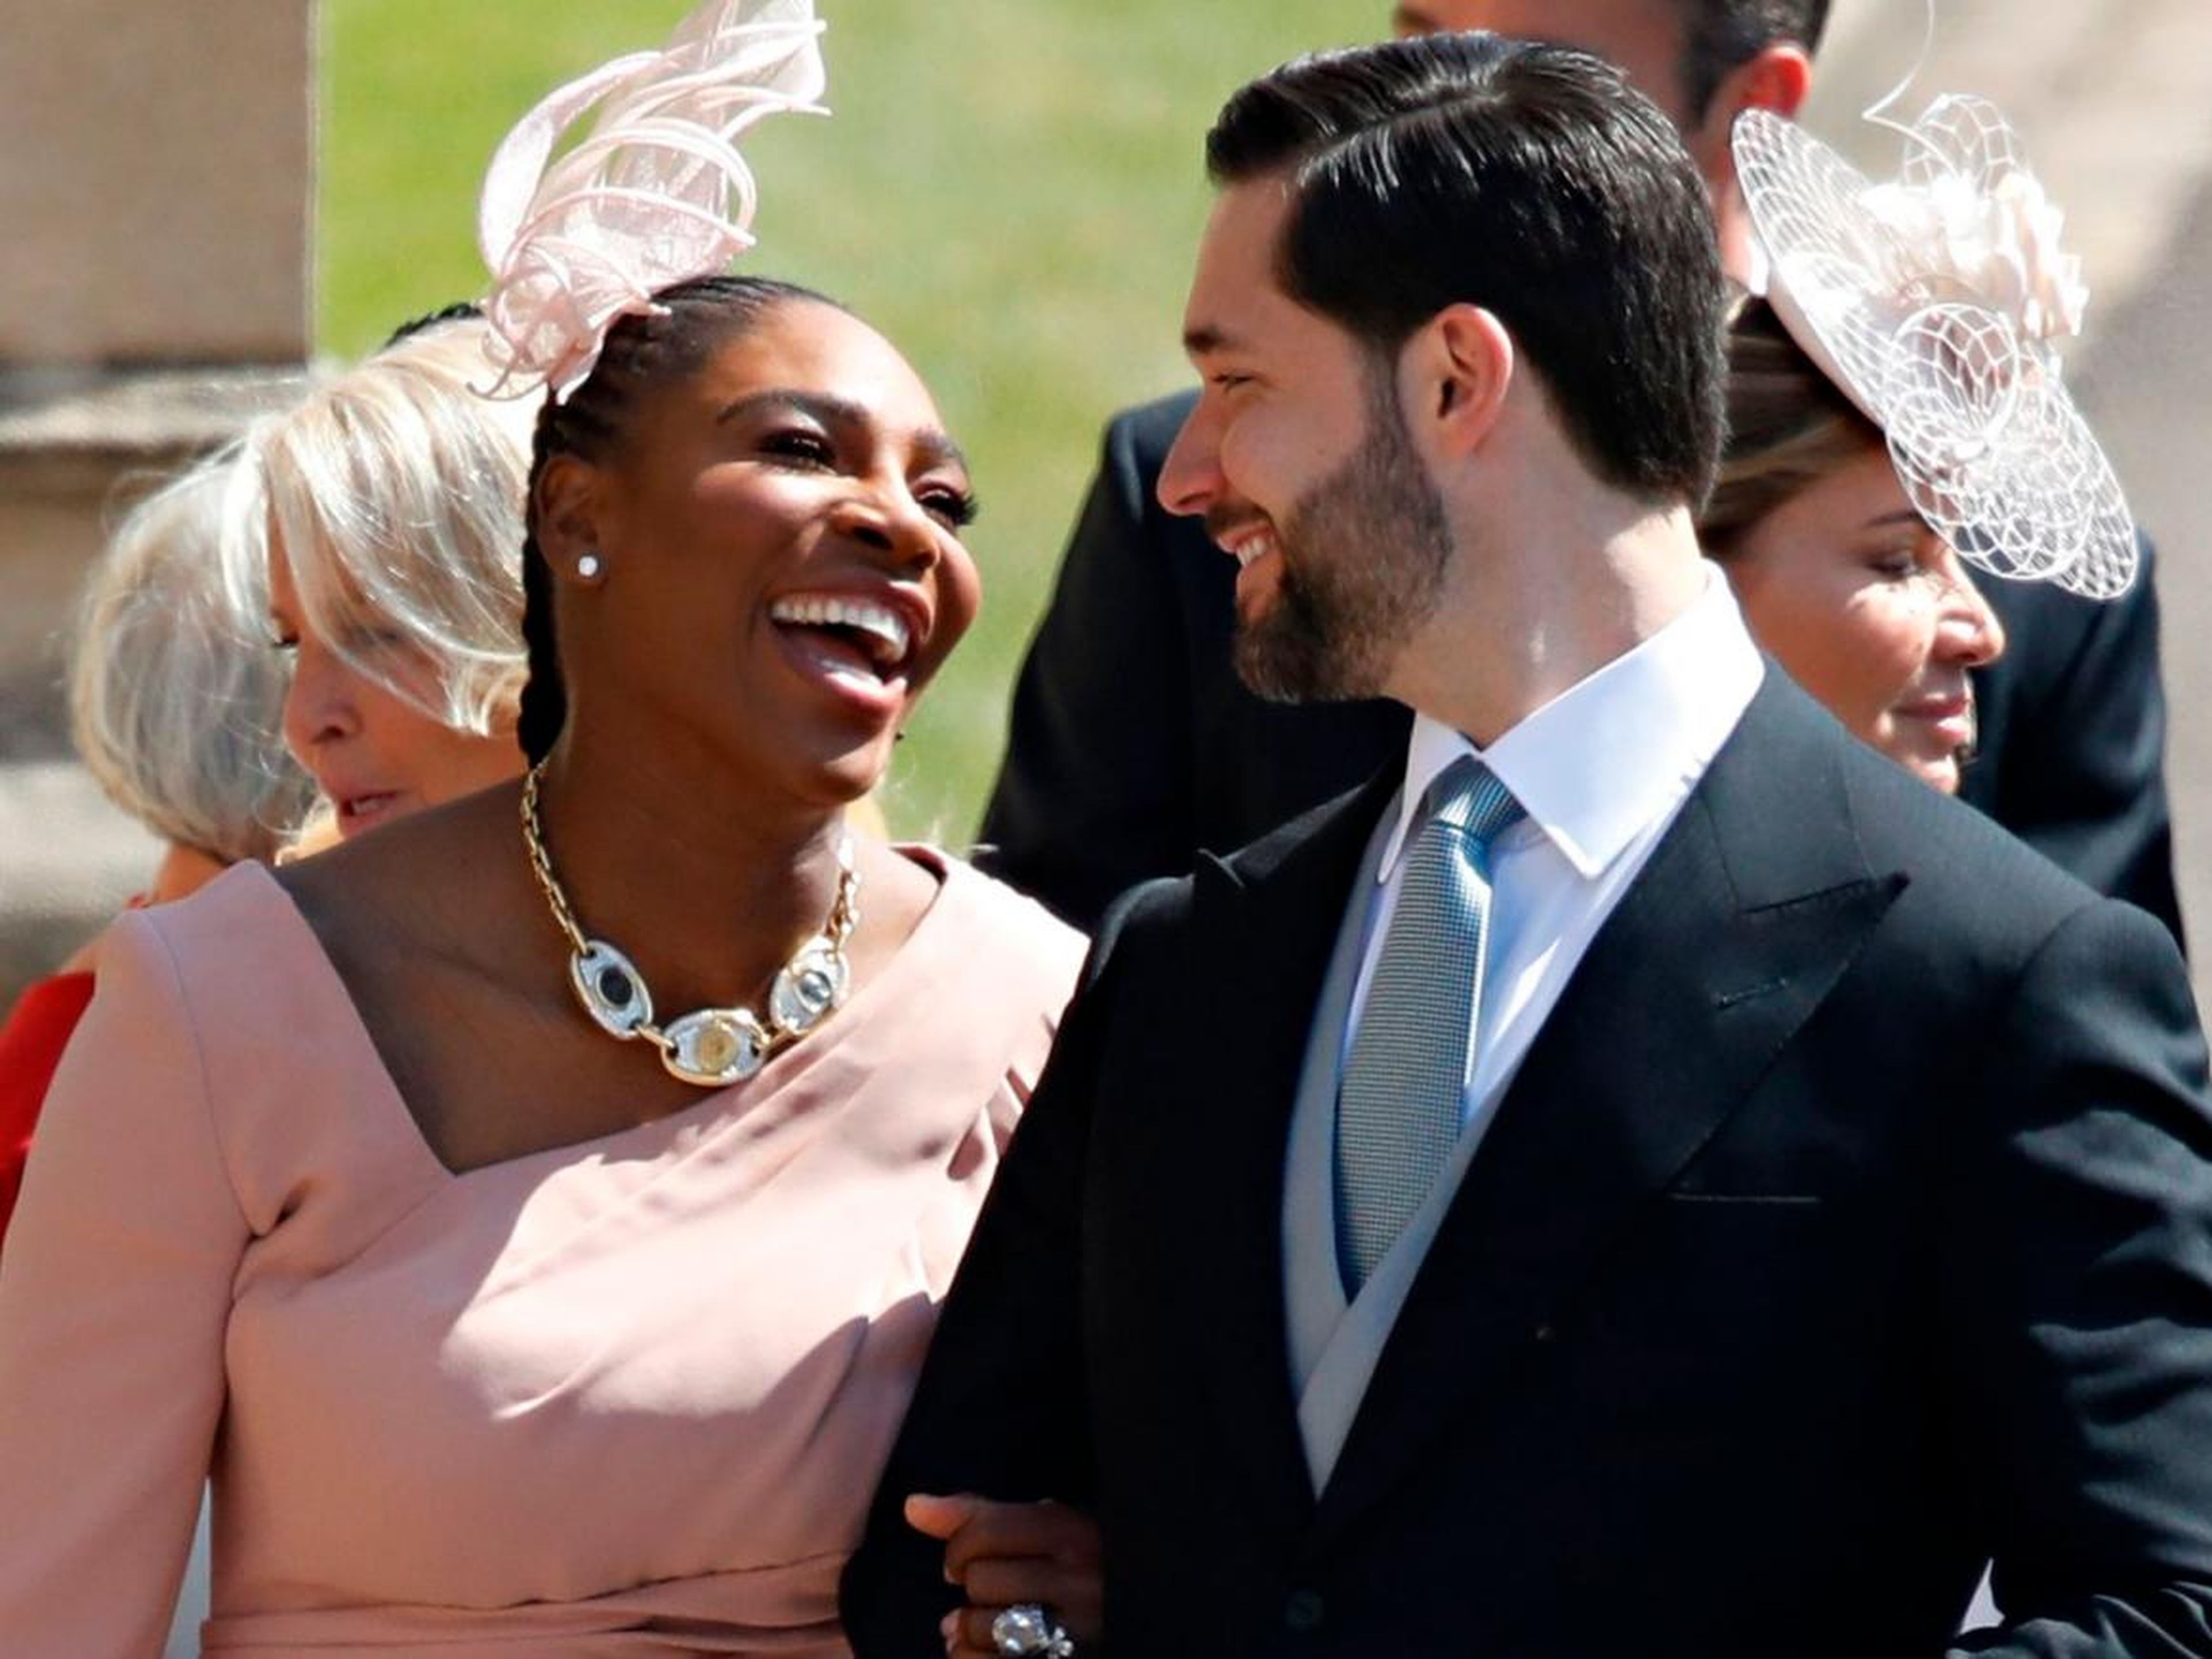 MAY: Reddit founder Alexis Ohanian was spotted at the wedding of Prince Harry and Meghan Markle. His wife, Serena Williams, is Markle's close friend.